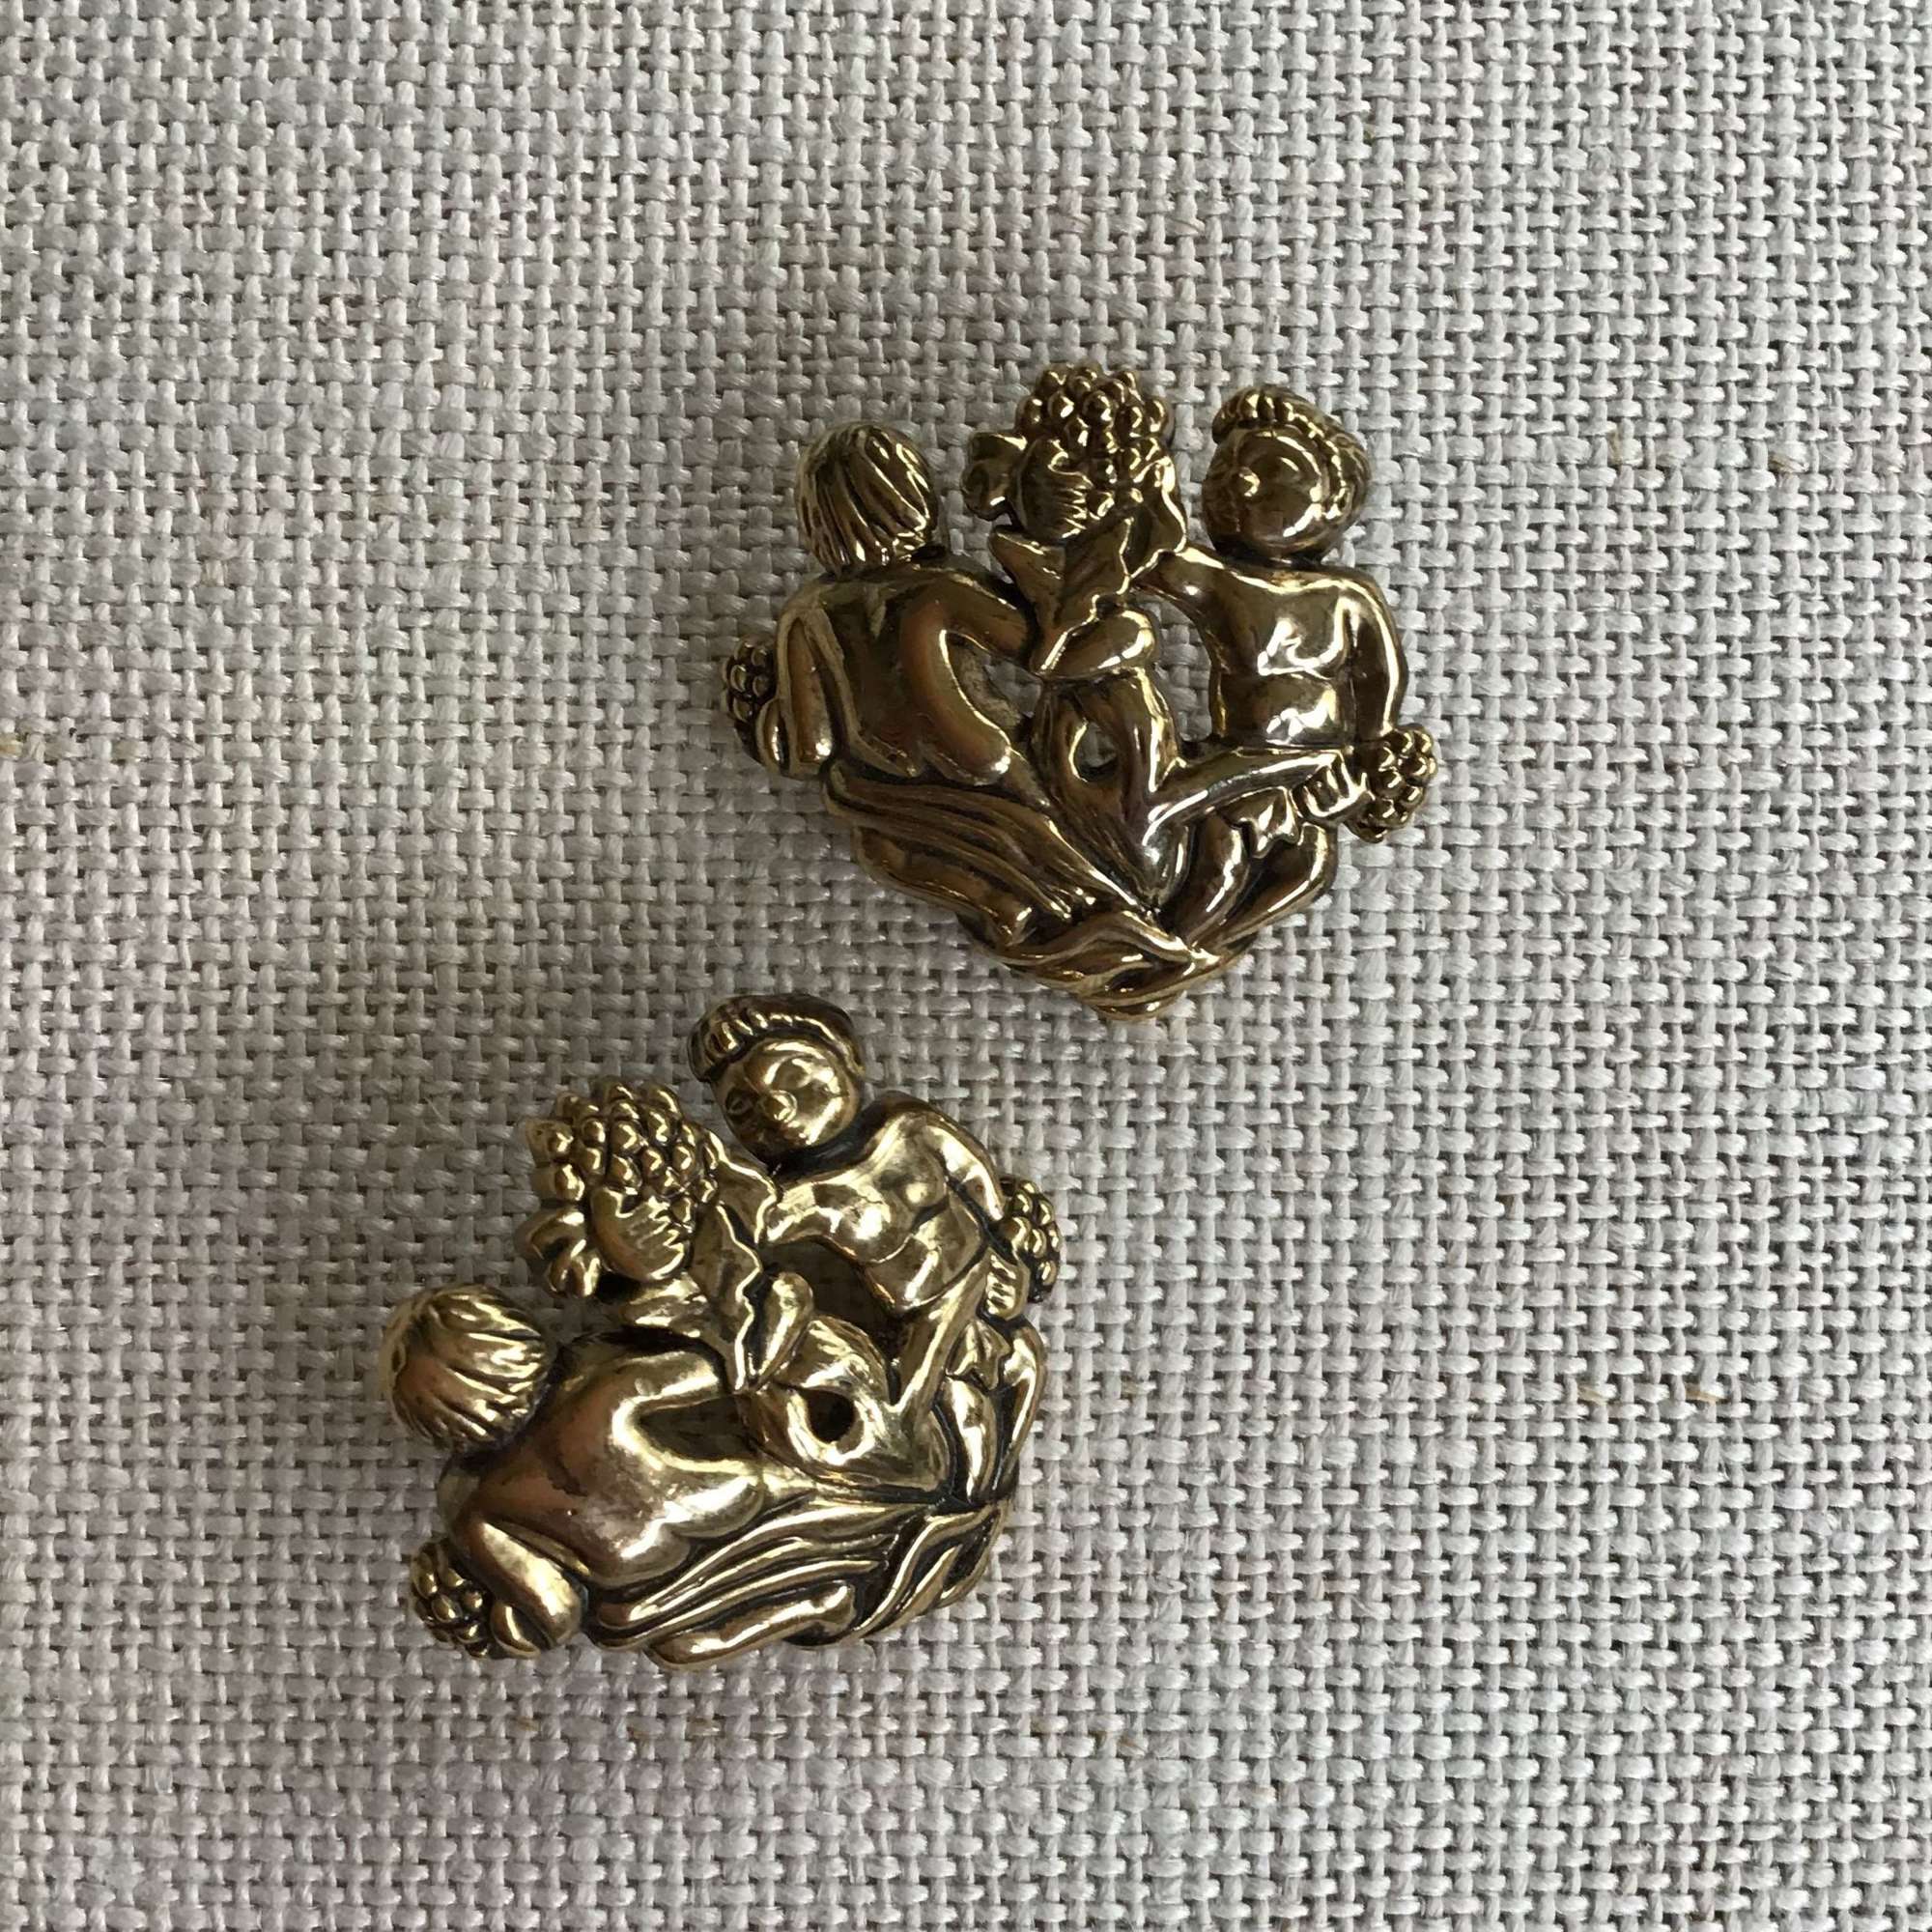 Vintage Joan Collins putti with grapes post earrings